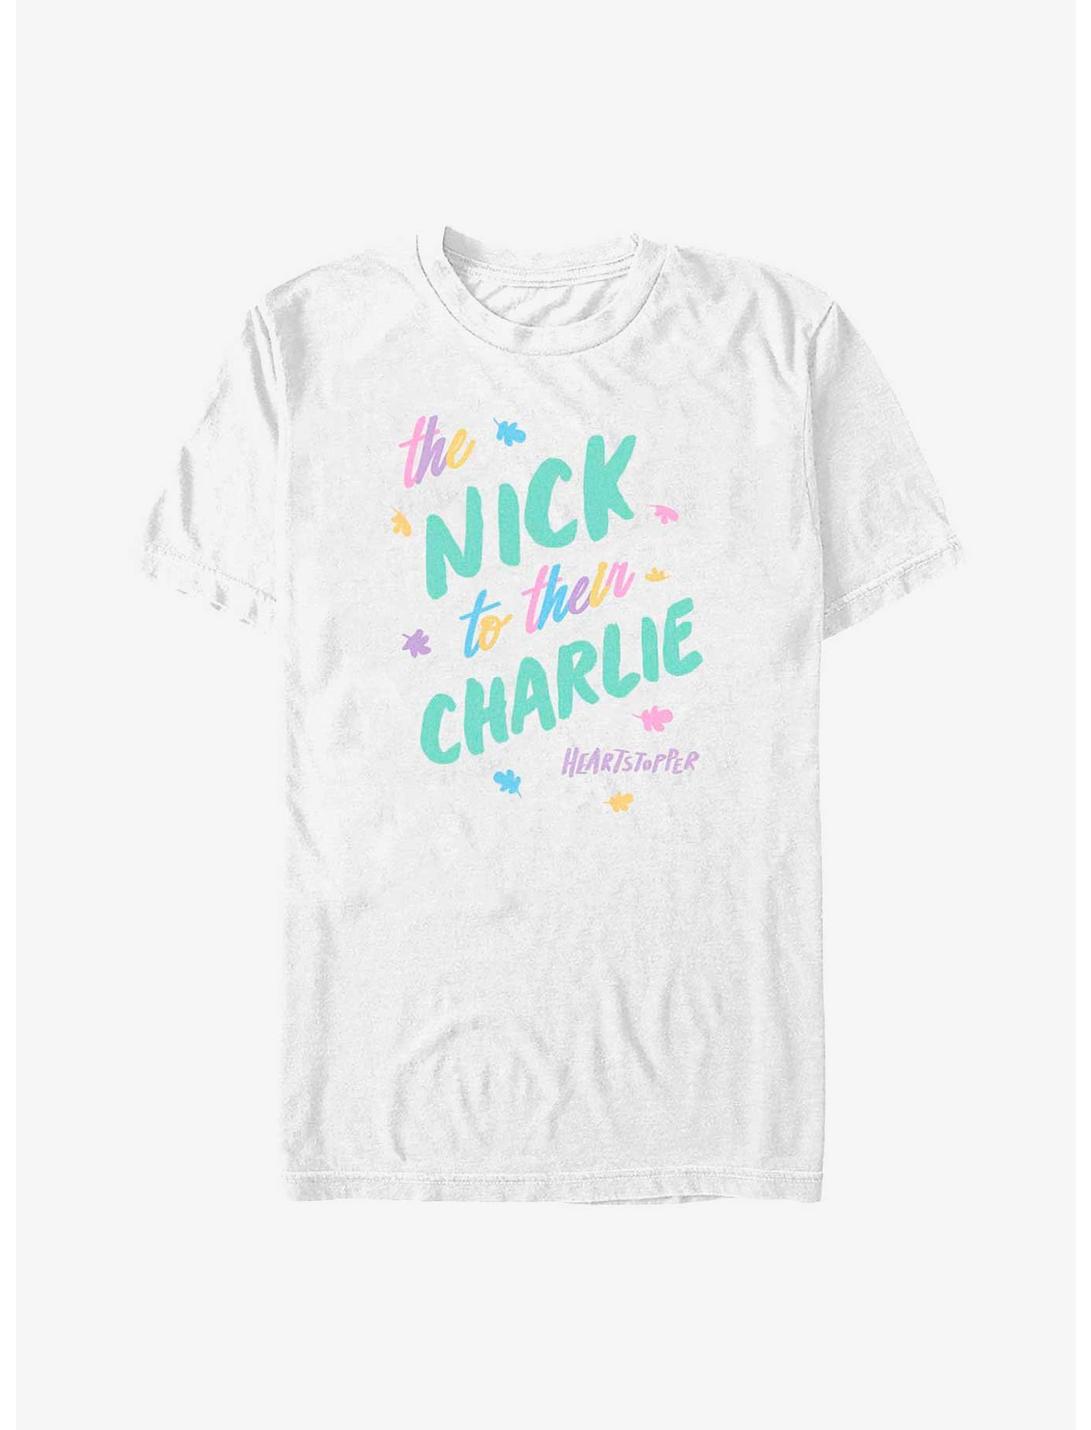 Heartstopper The Nick To Their Charlie Big & Tall T-Shirt, WHITE, hi-res